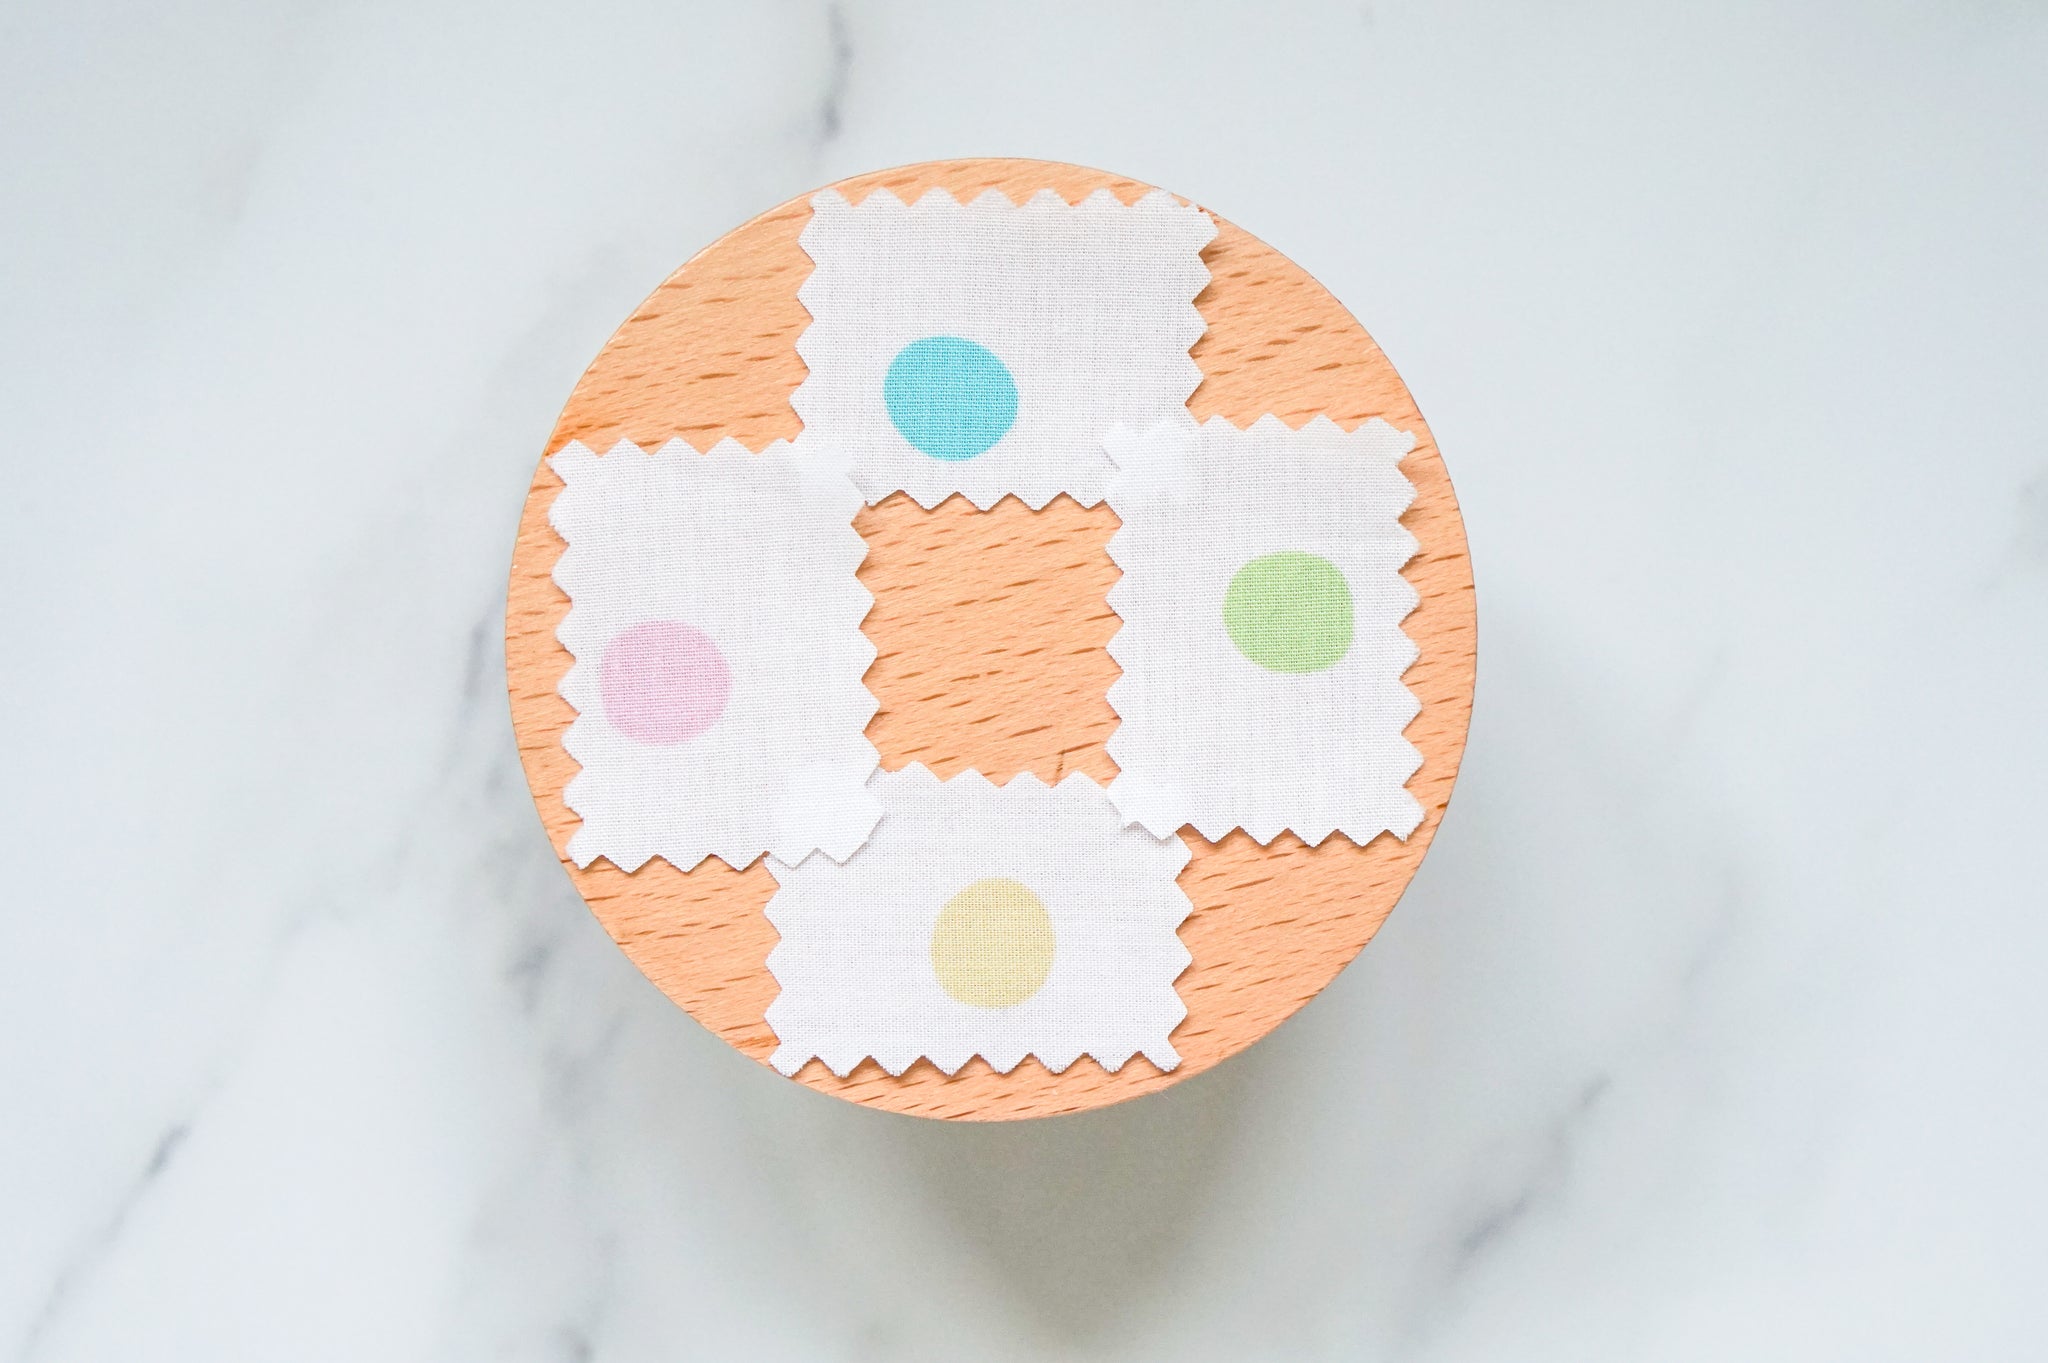 MAKE PLACEMATS FOR YOUR DOLLS' KITCHEN TABLE